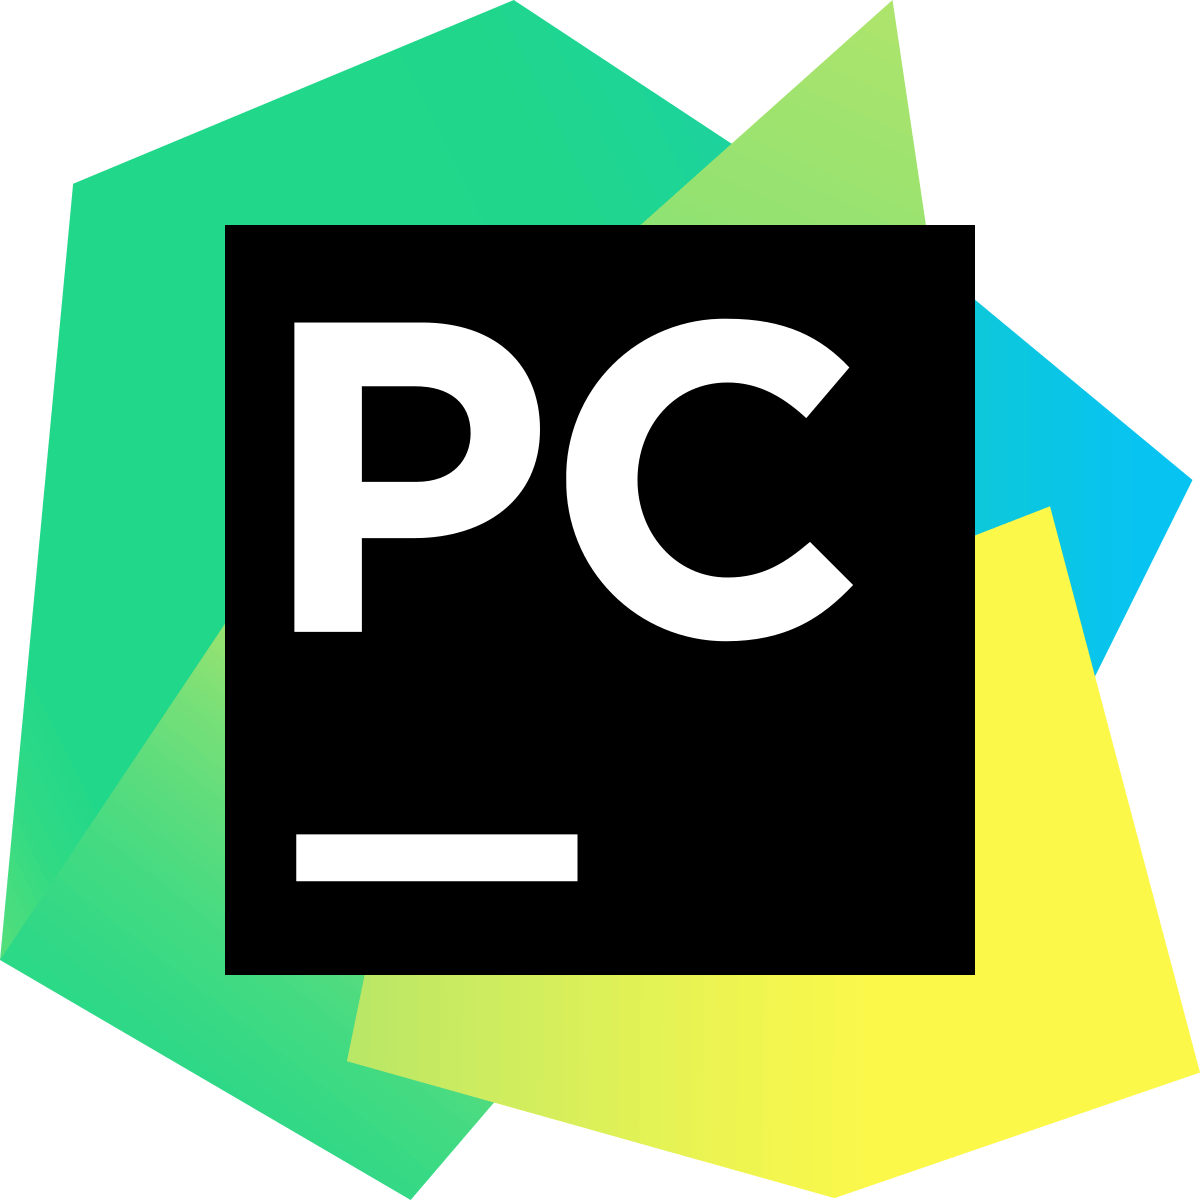 An image of PyCharm's logo that says